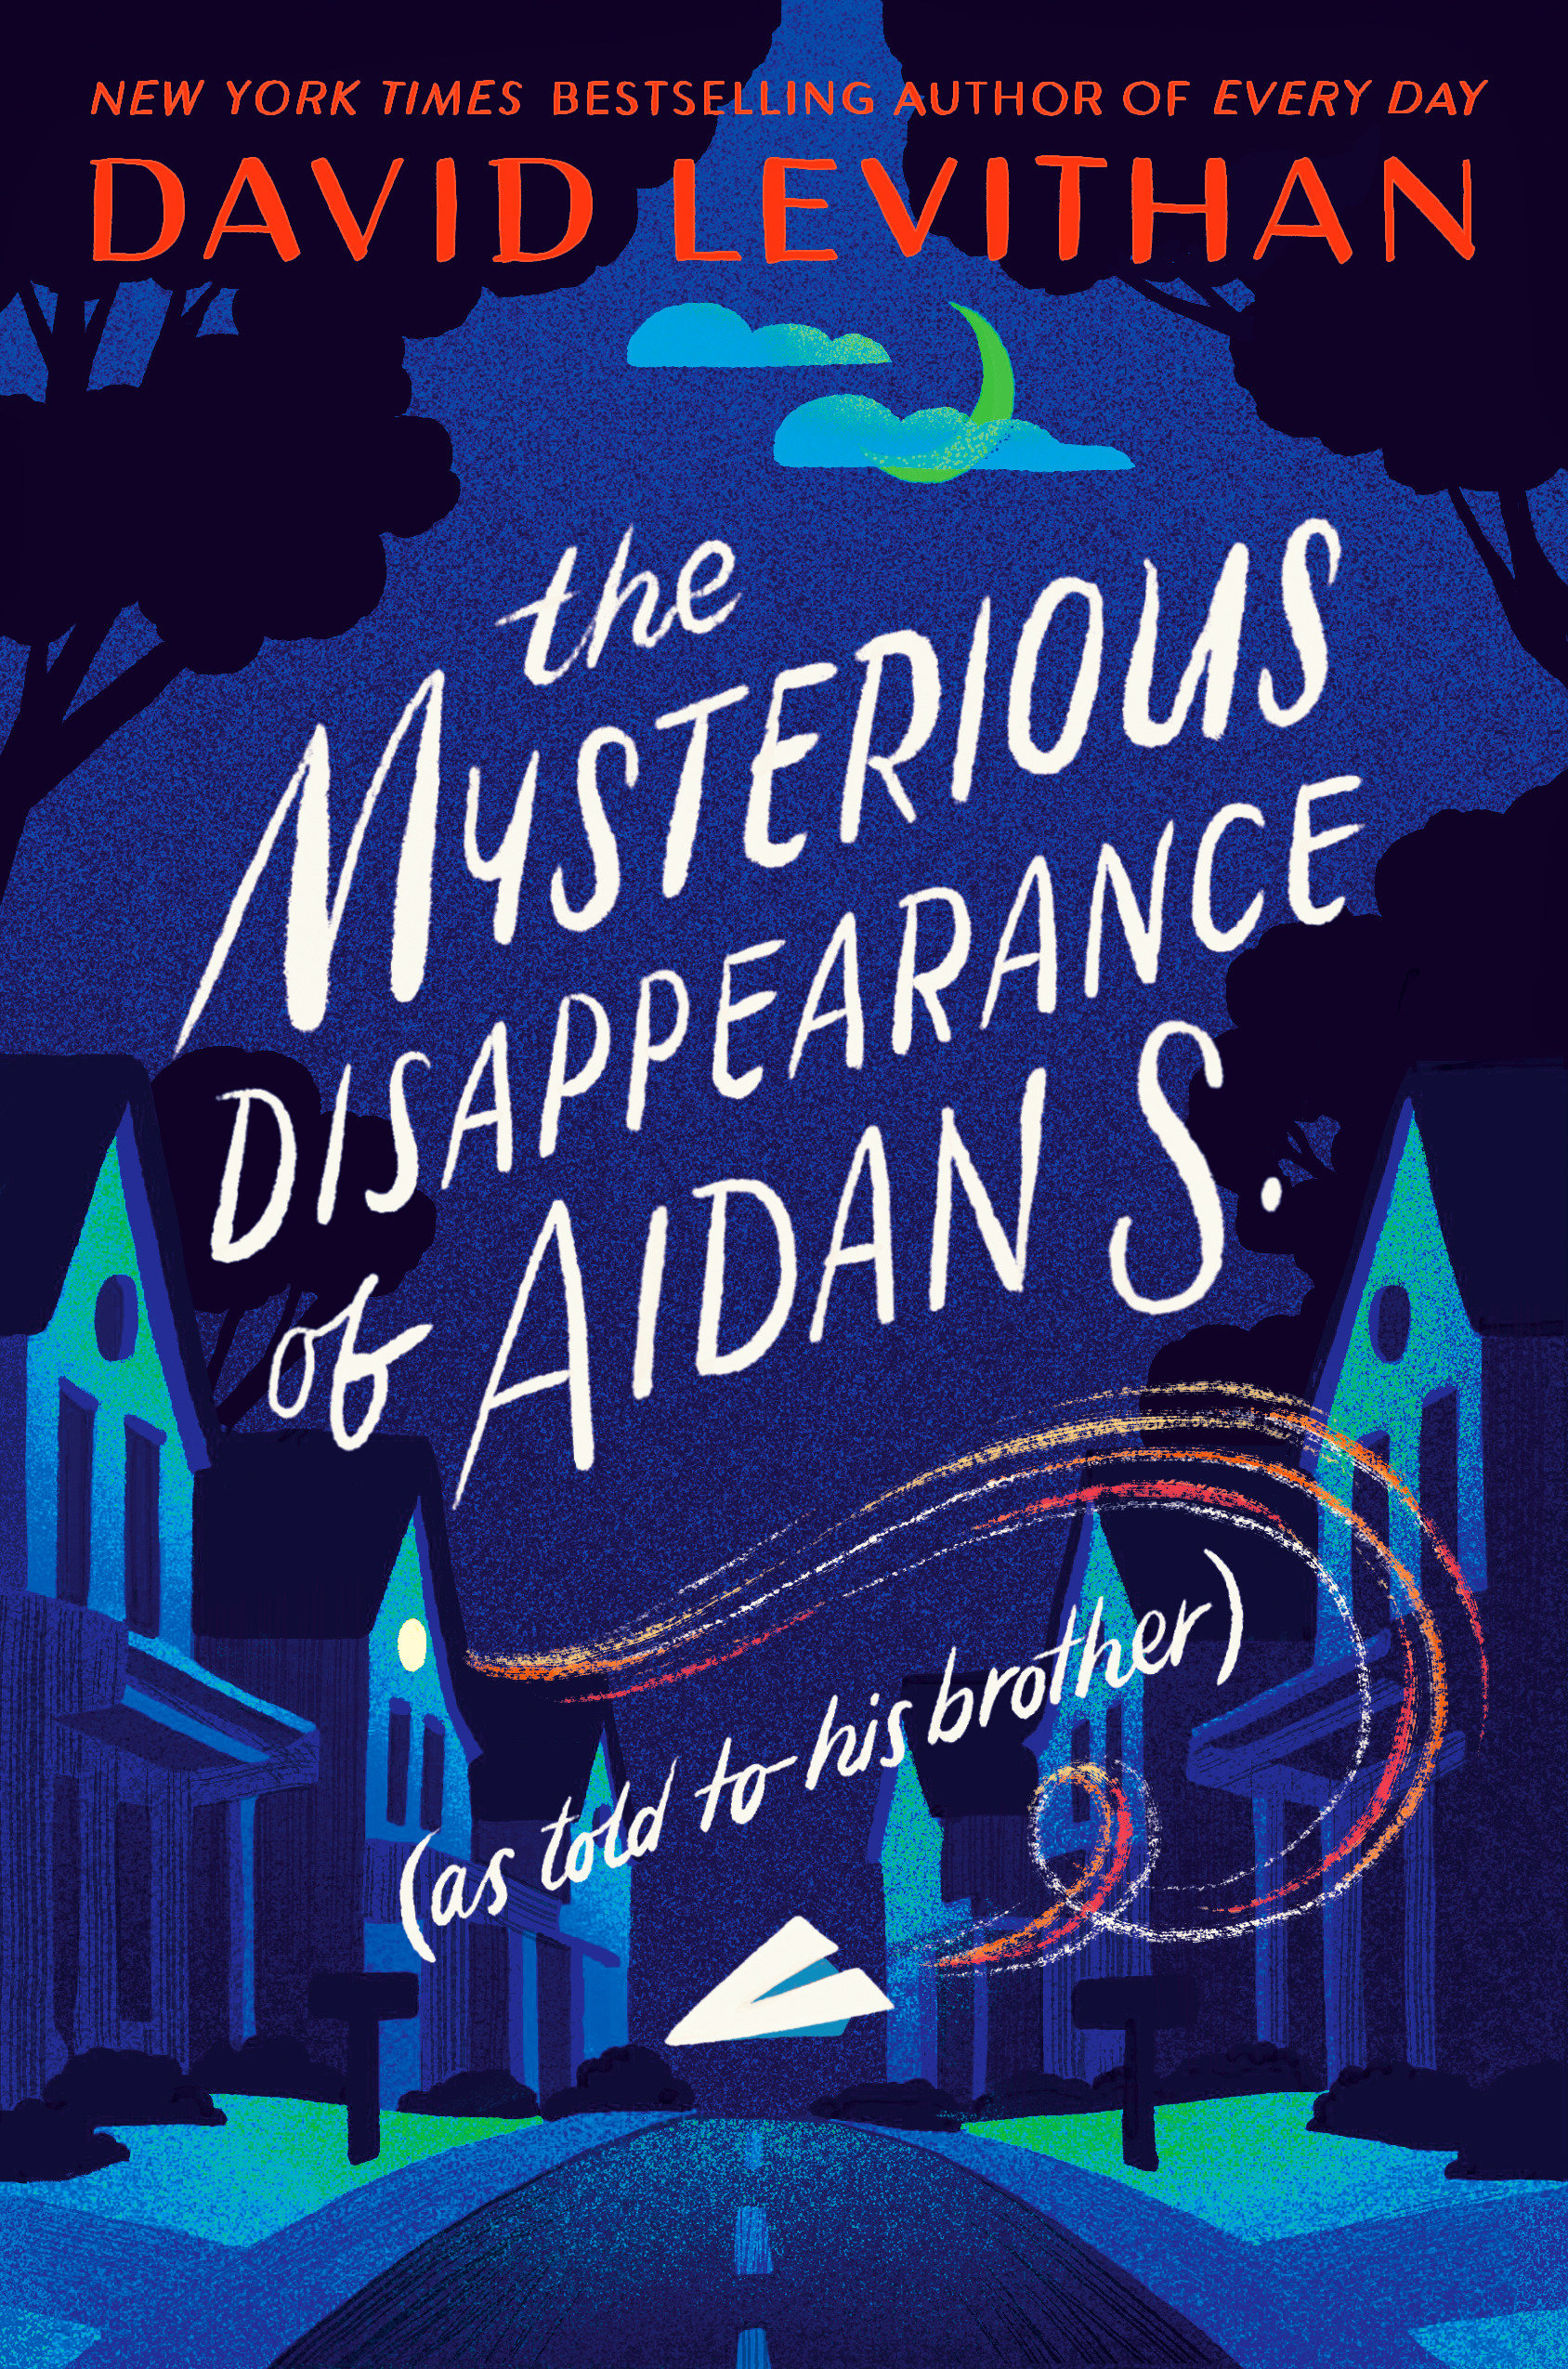 The Mysterious Disappearance Of Aidan S. (As Told To His Brother) (Hardcover Book)